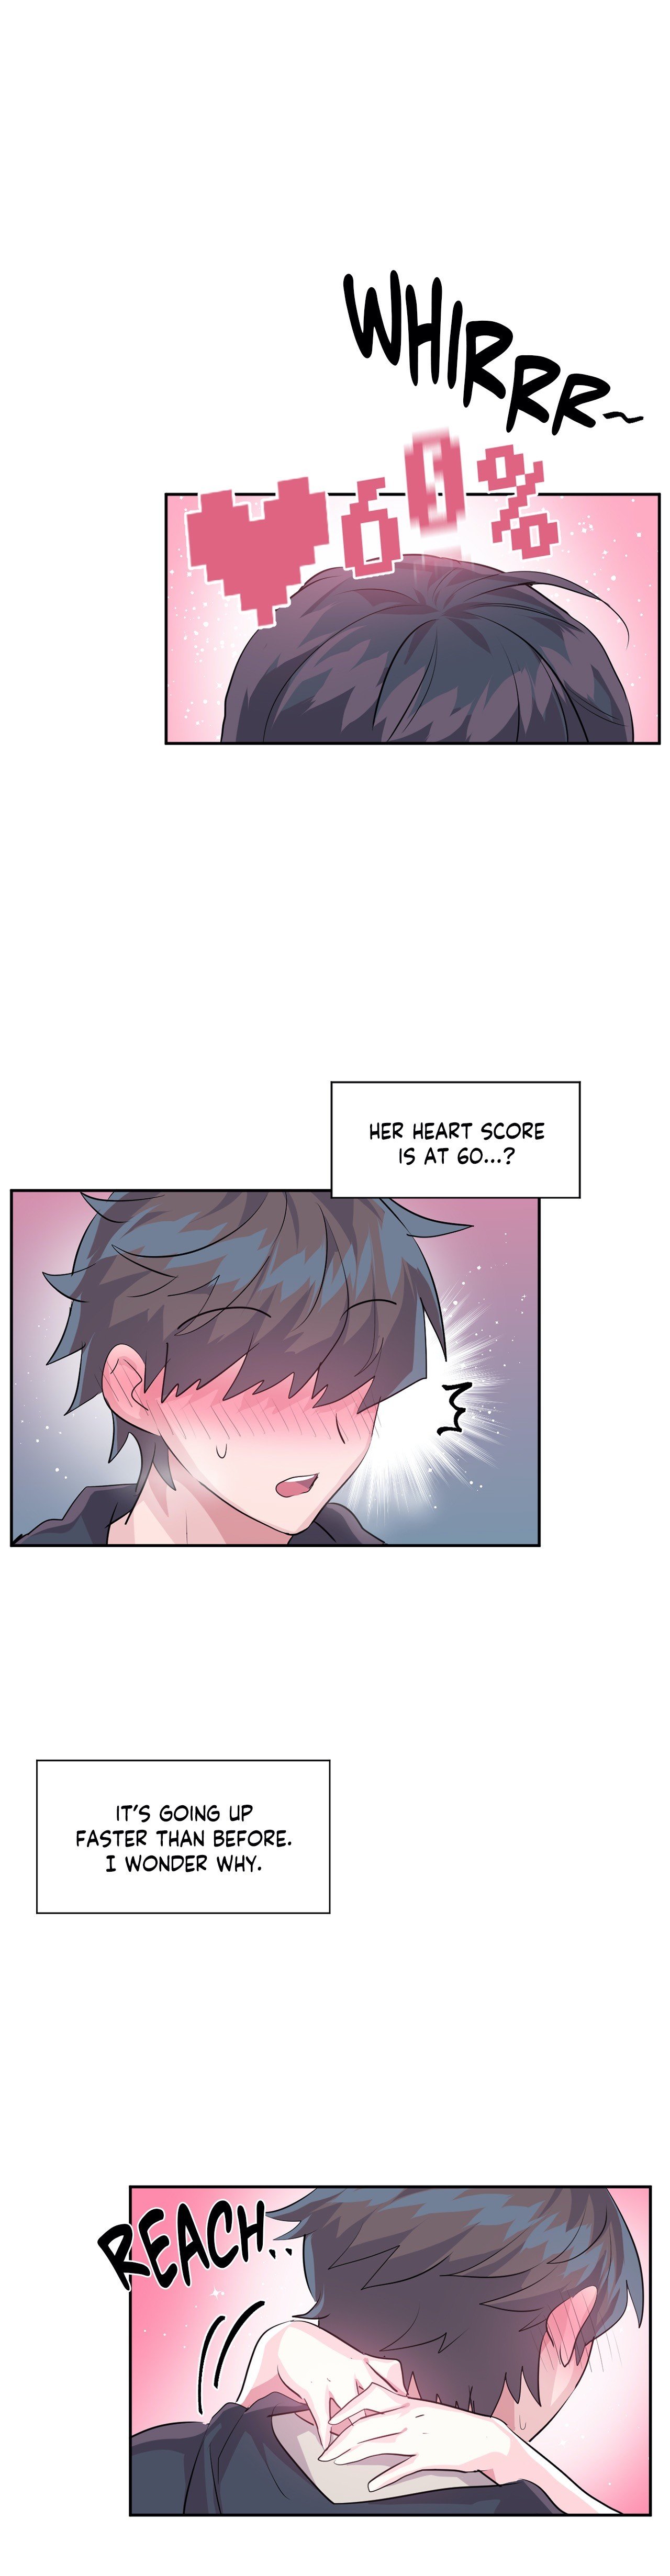 log-in-to-lust-a-land-chap-35-17